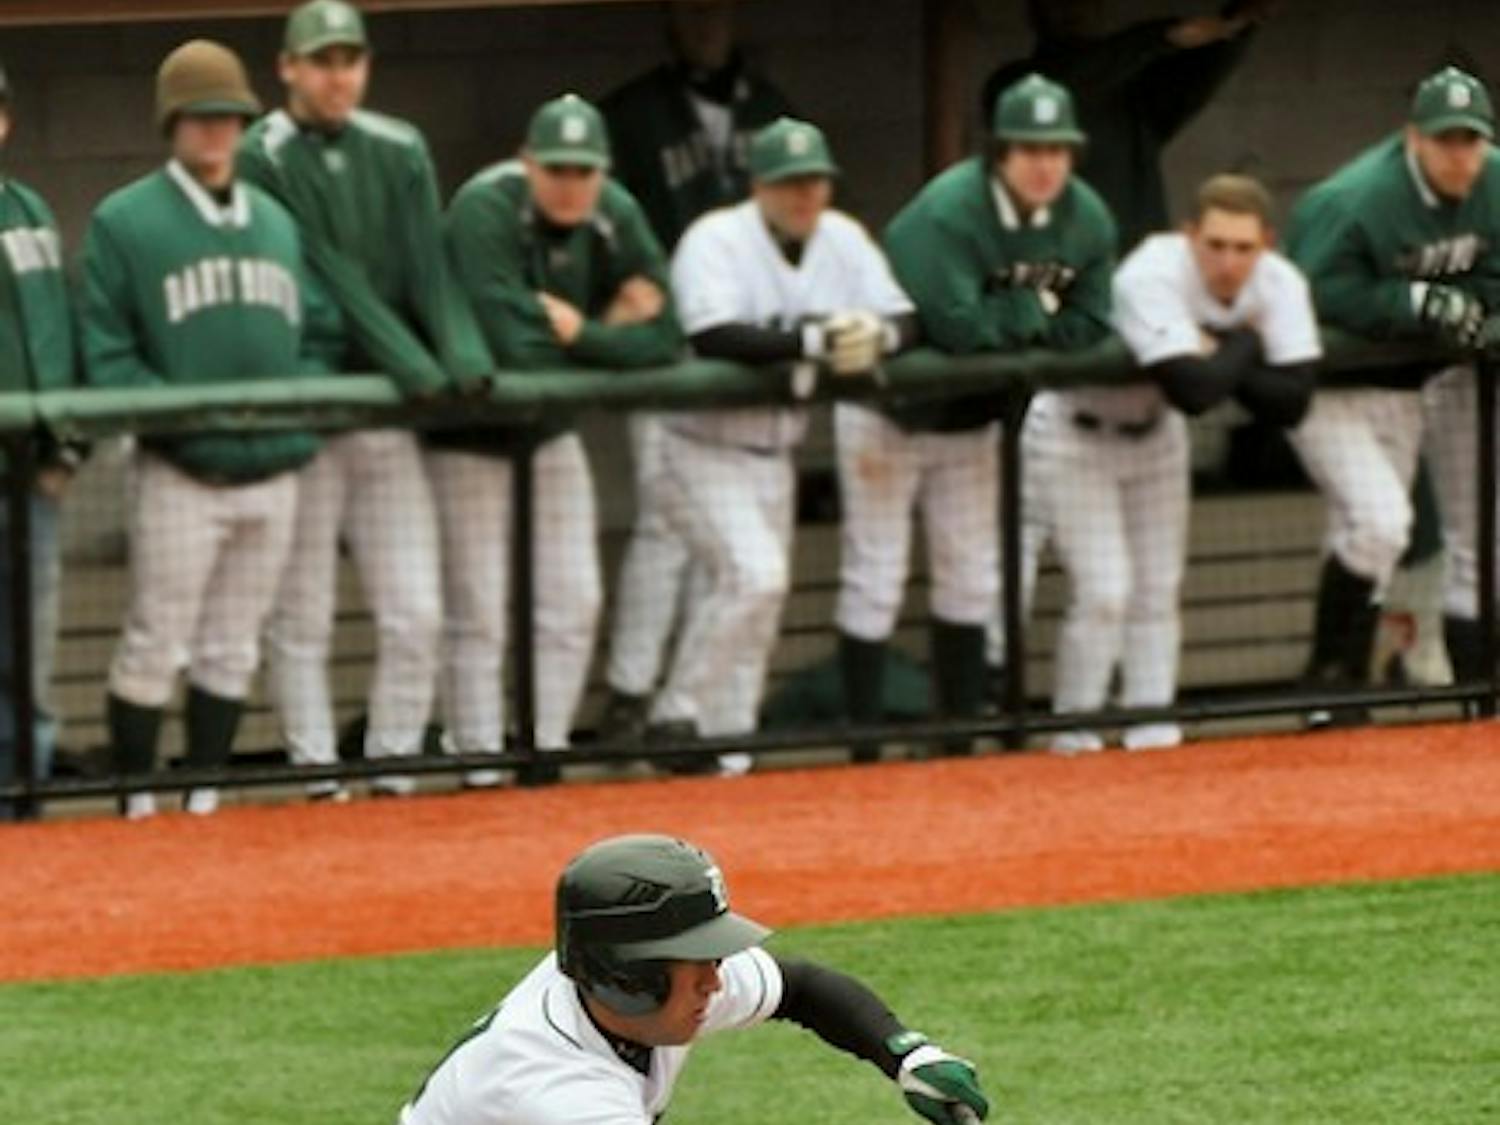 The Big Green baseball team will face the overall No. 4 seed University of North Carolina this evening at 6 p.m. in Chapel Hill, N.C.